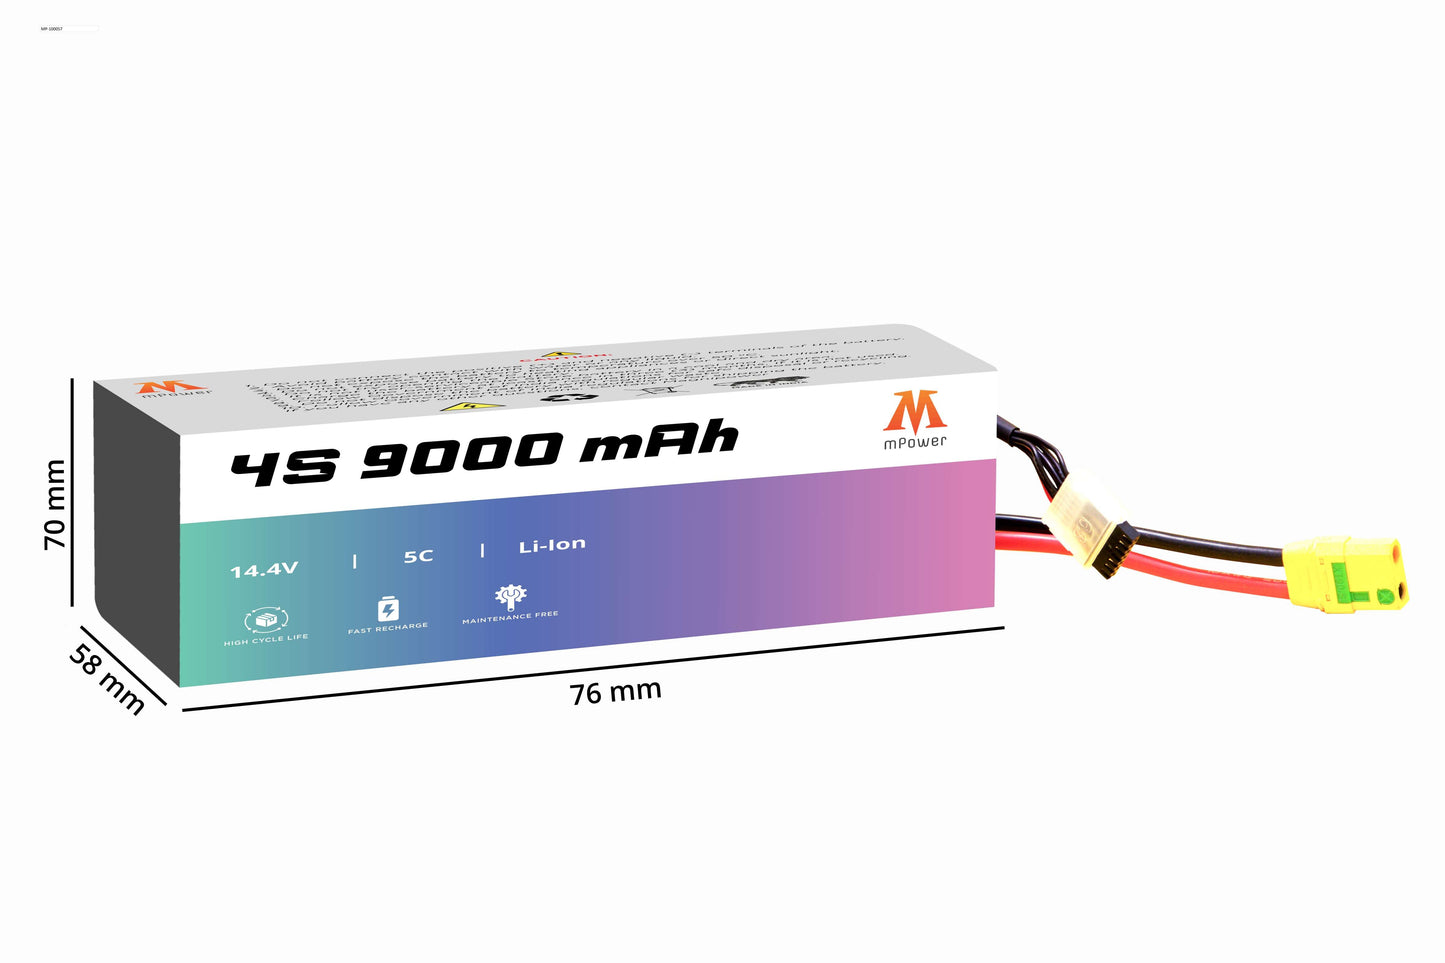 mPower 4S 9000mAh Lithium-Ion Battery for Surveillance Drones